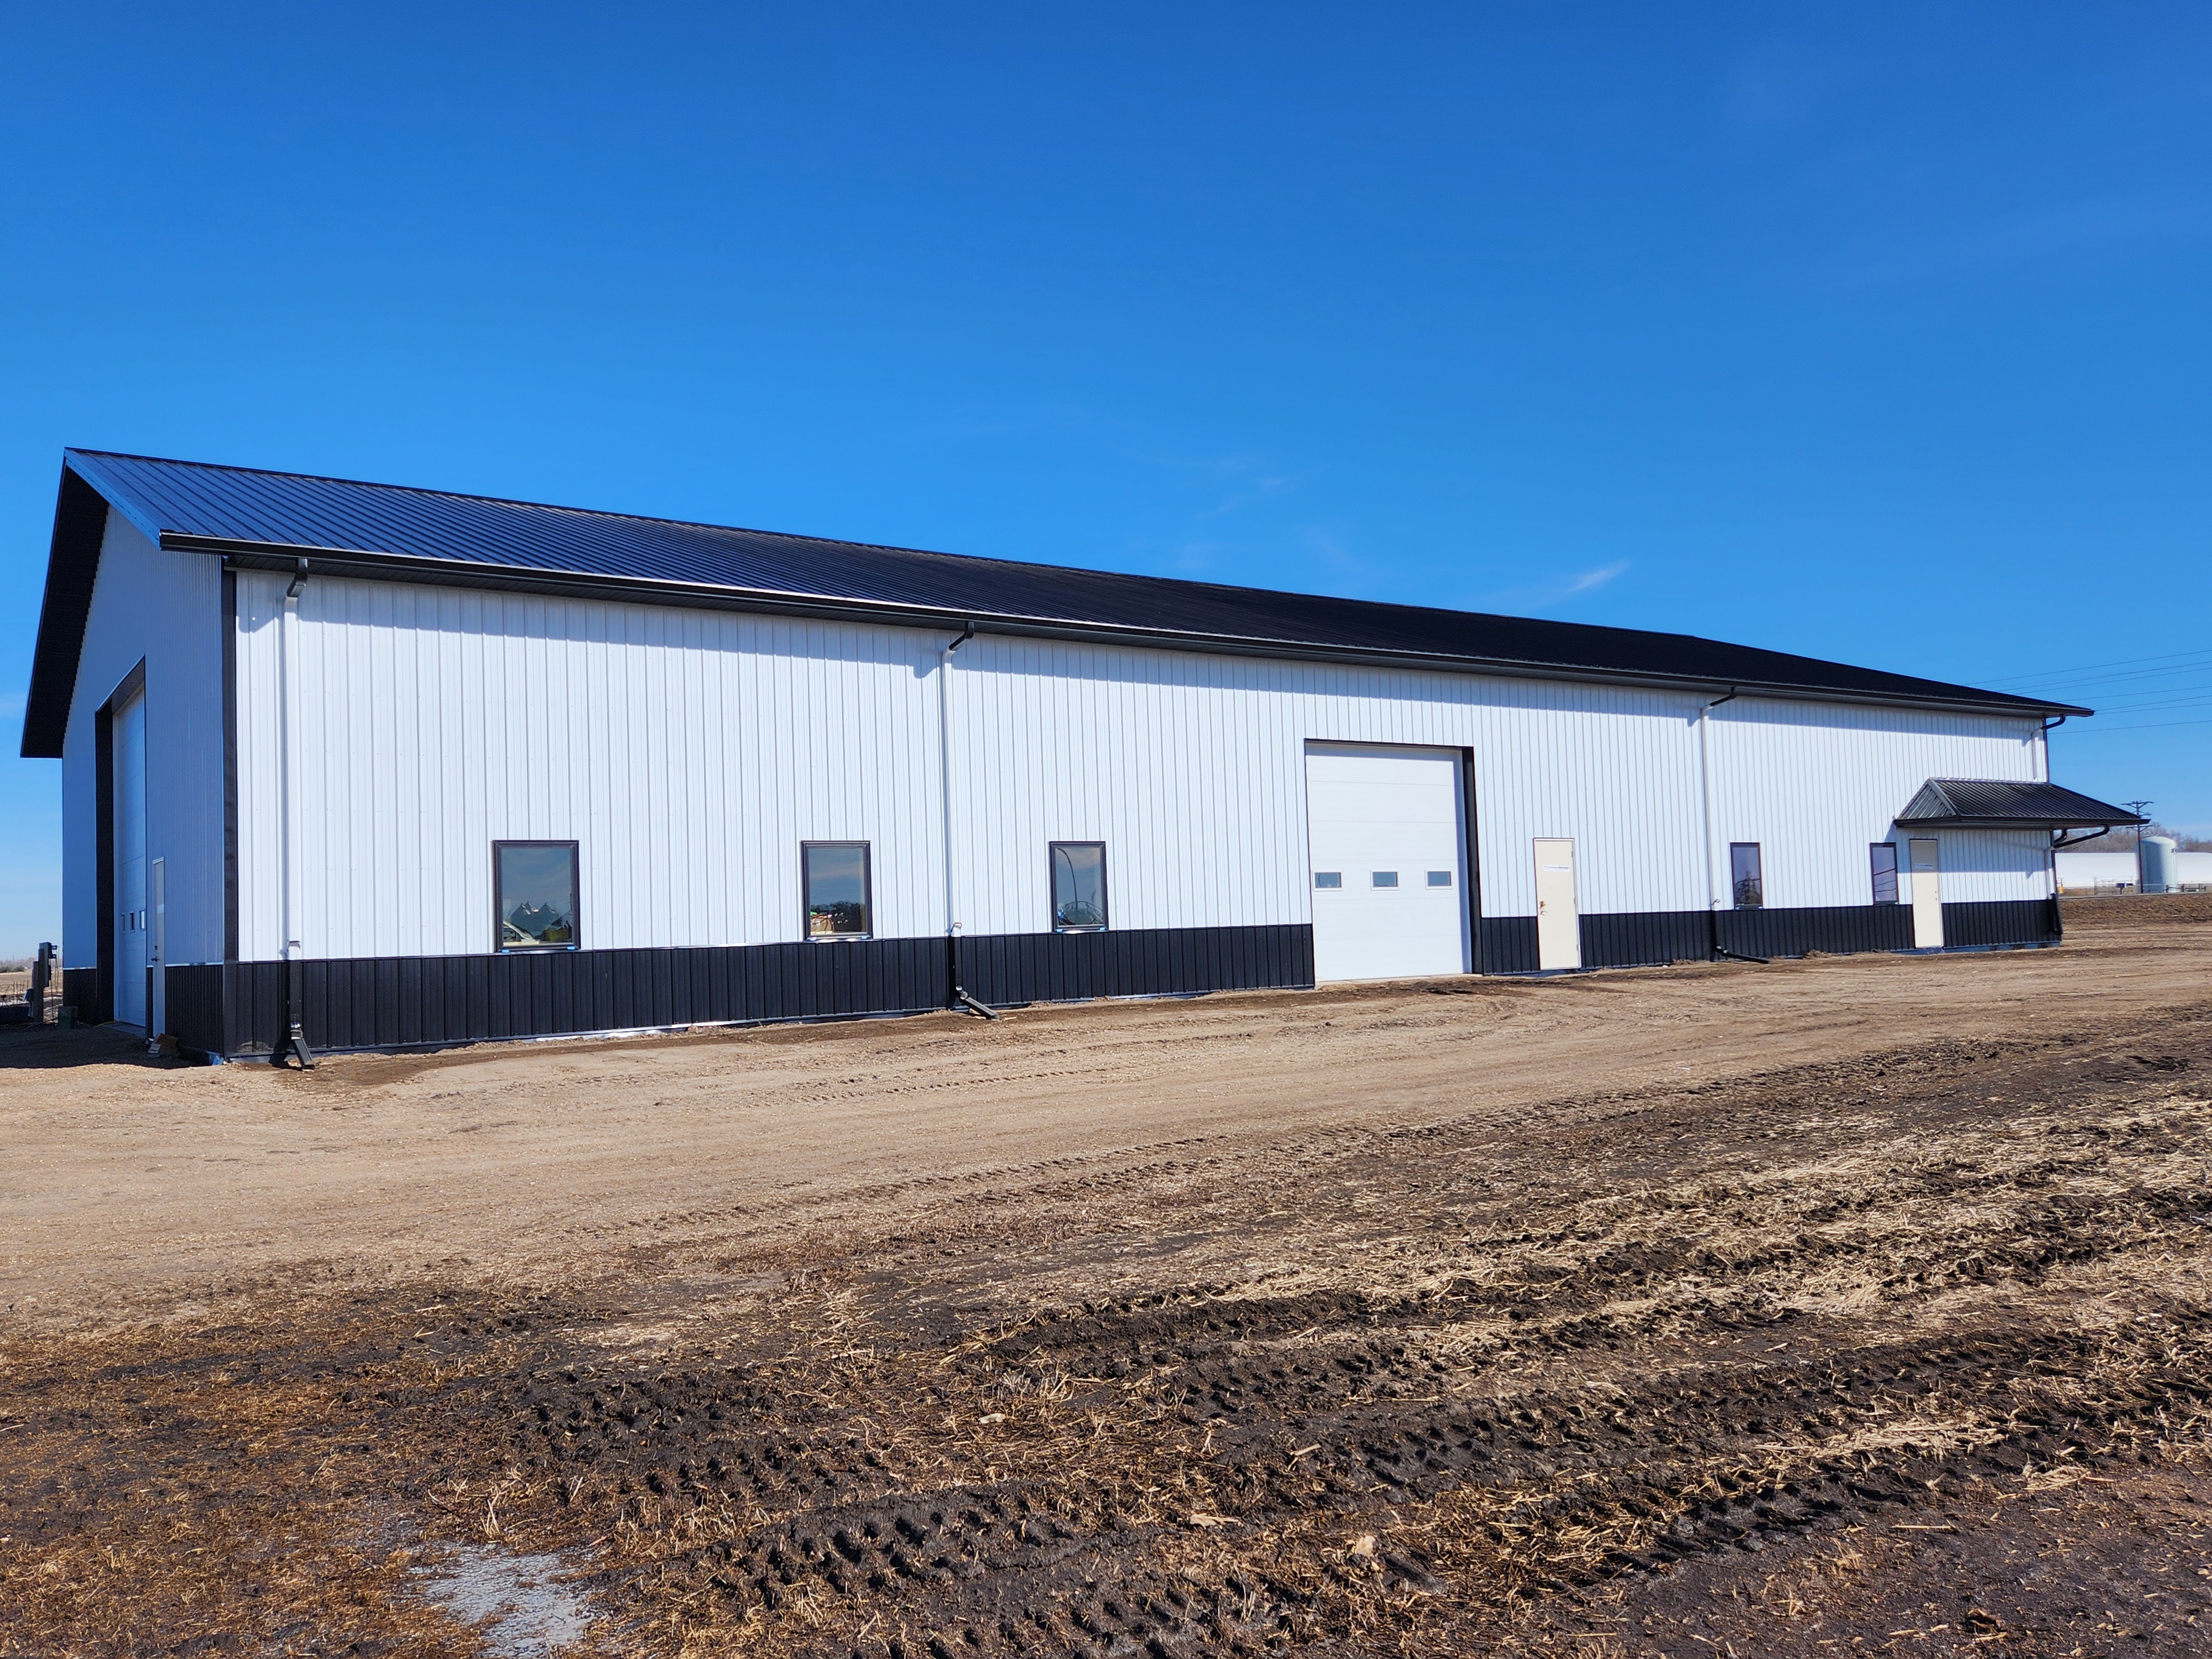 A 65-foot by 120-foot steel building with black wainscotting, white side walls, and a black roof stands on a gravel yard at the NDSU Oakes Irrigation Research Site. 